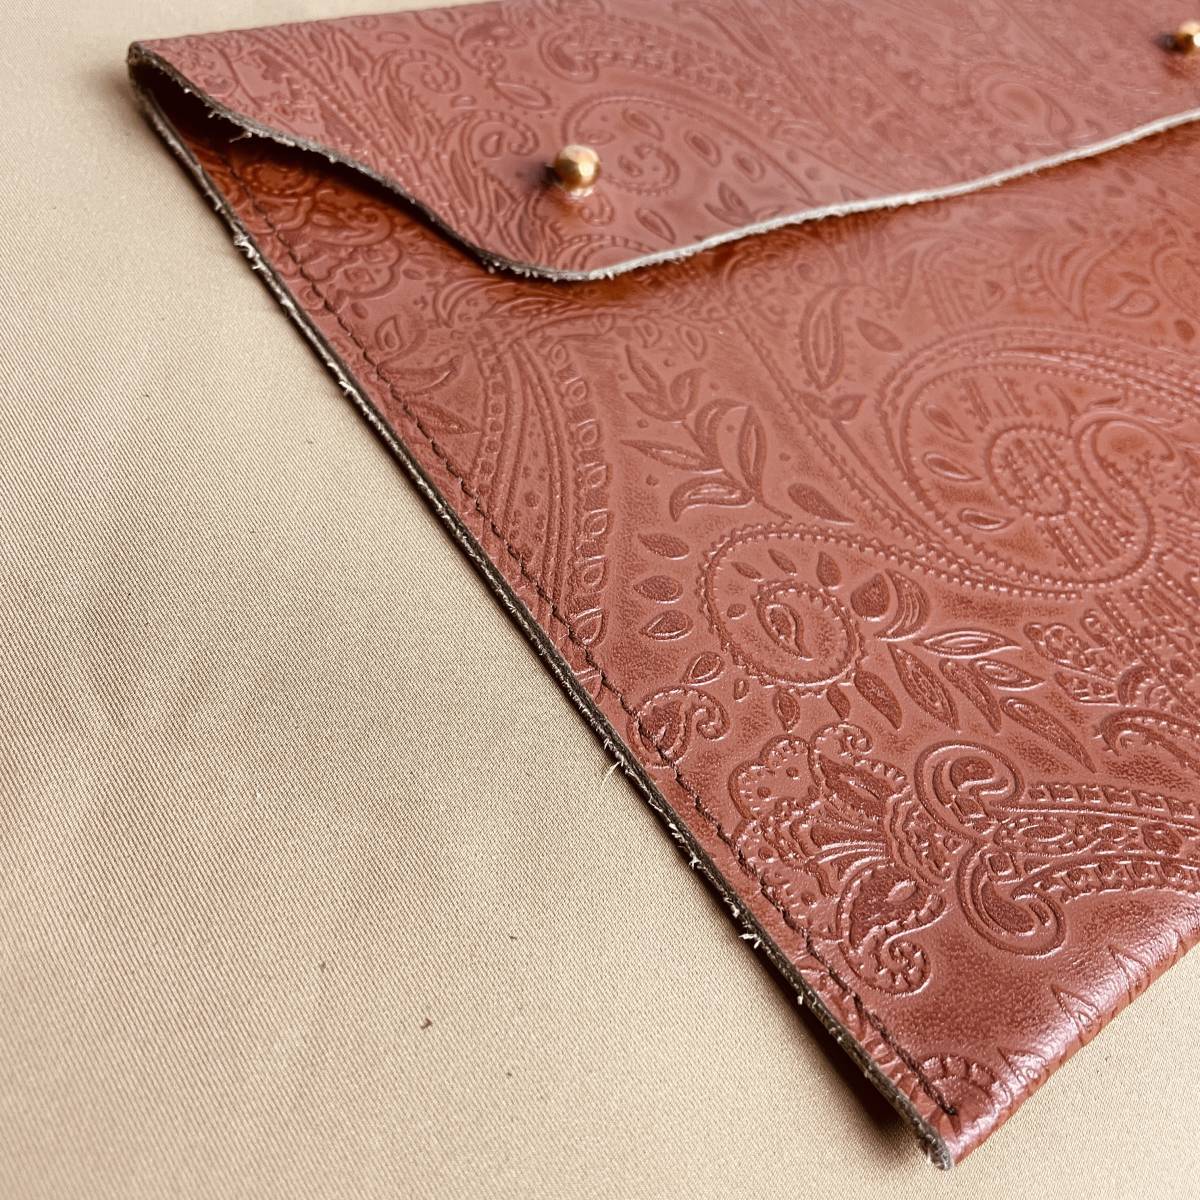  leather clutch bag peiz Lee type pushed . combination Brown original leather by using . simple prejudice hand made made in Japan B3133